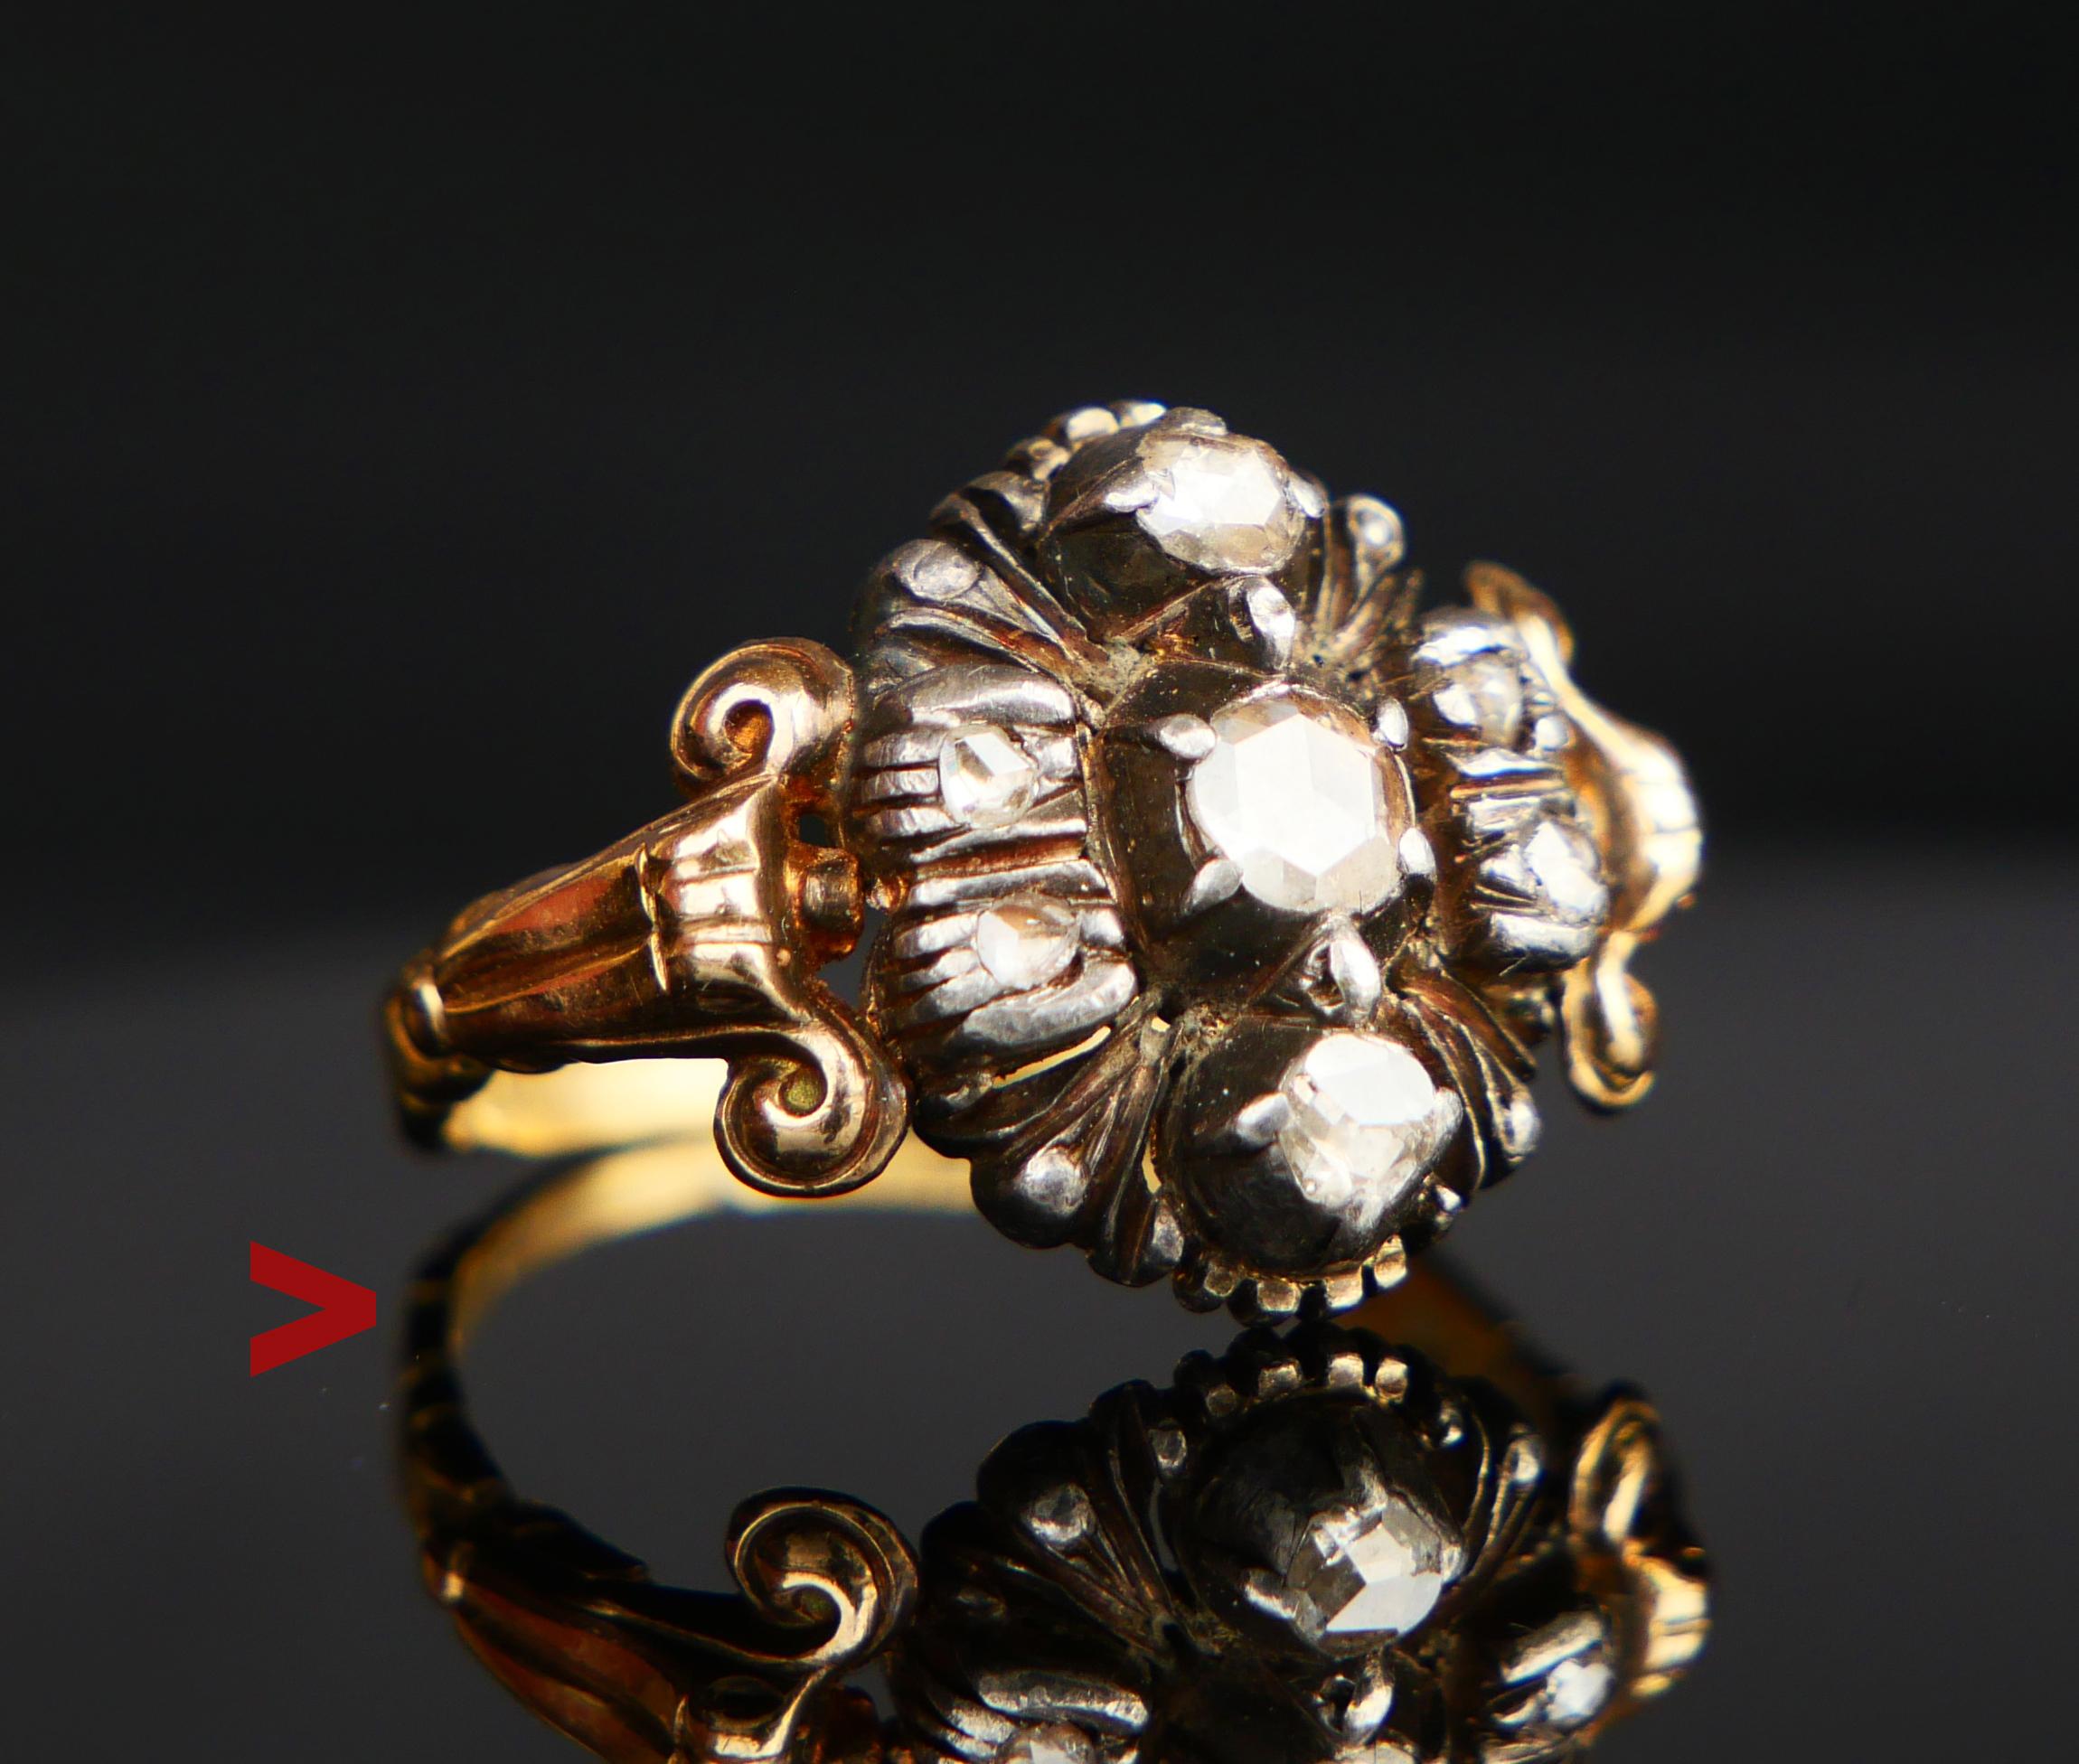 Beautiful Diamond Flower Ring, Renaissance styled. Set of Swedish hallmarks, 18K, maker's and date code H8 / hand-made in 1934, city of Malmö.

The carved band is solid 18ct Yellow Gold, the face side of the crown is made of Silver holding 7